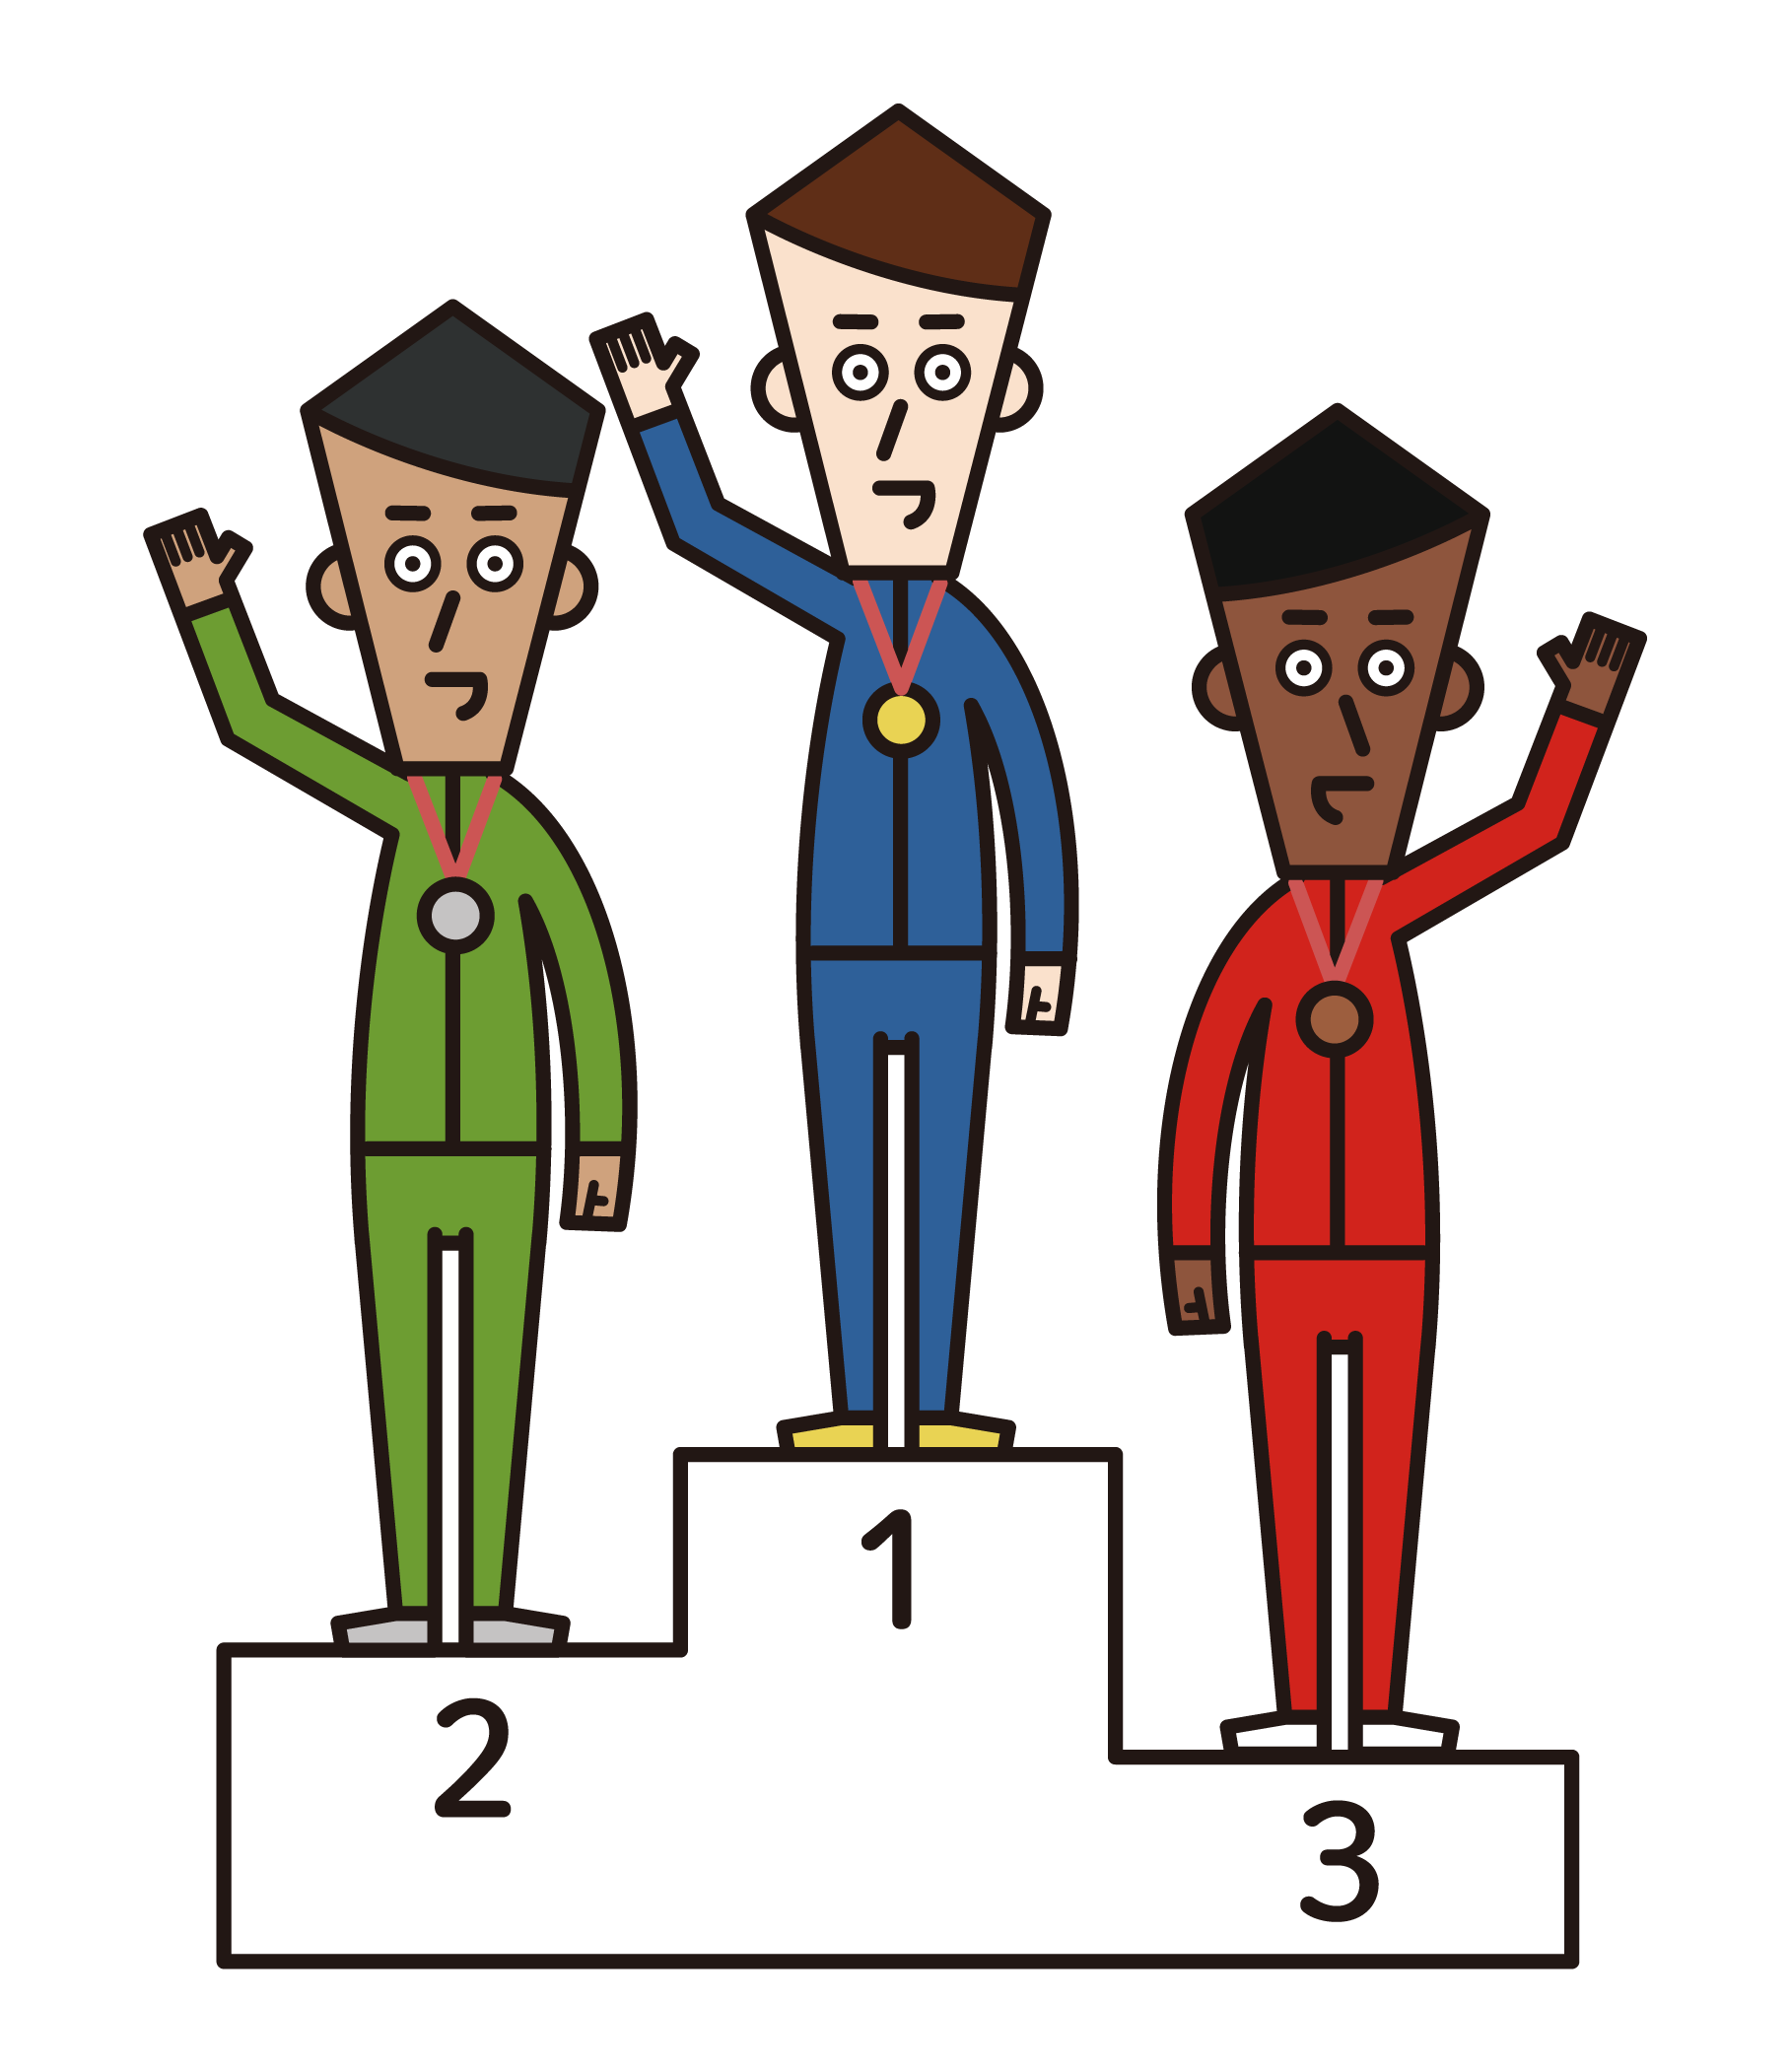 Illustration of athletes (male) being honored on the podium